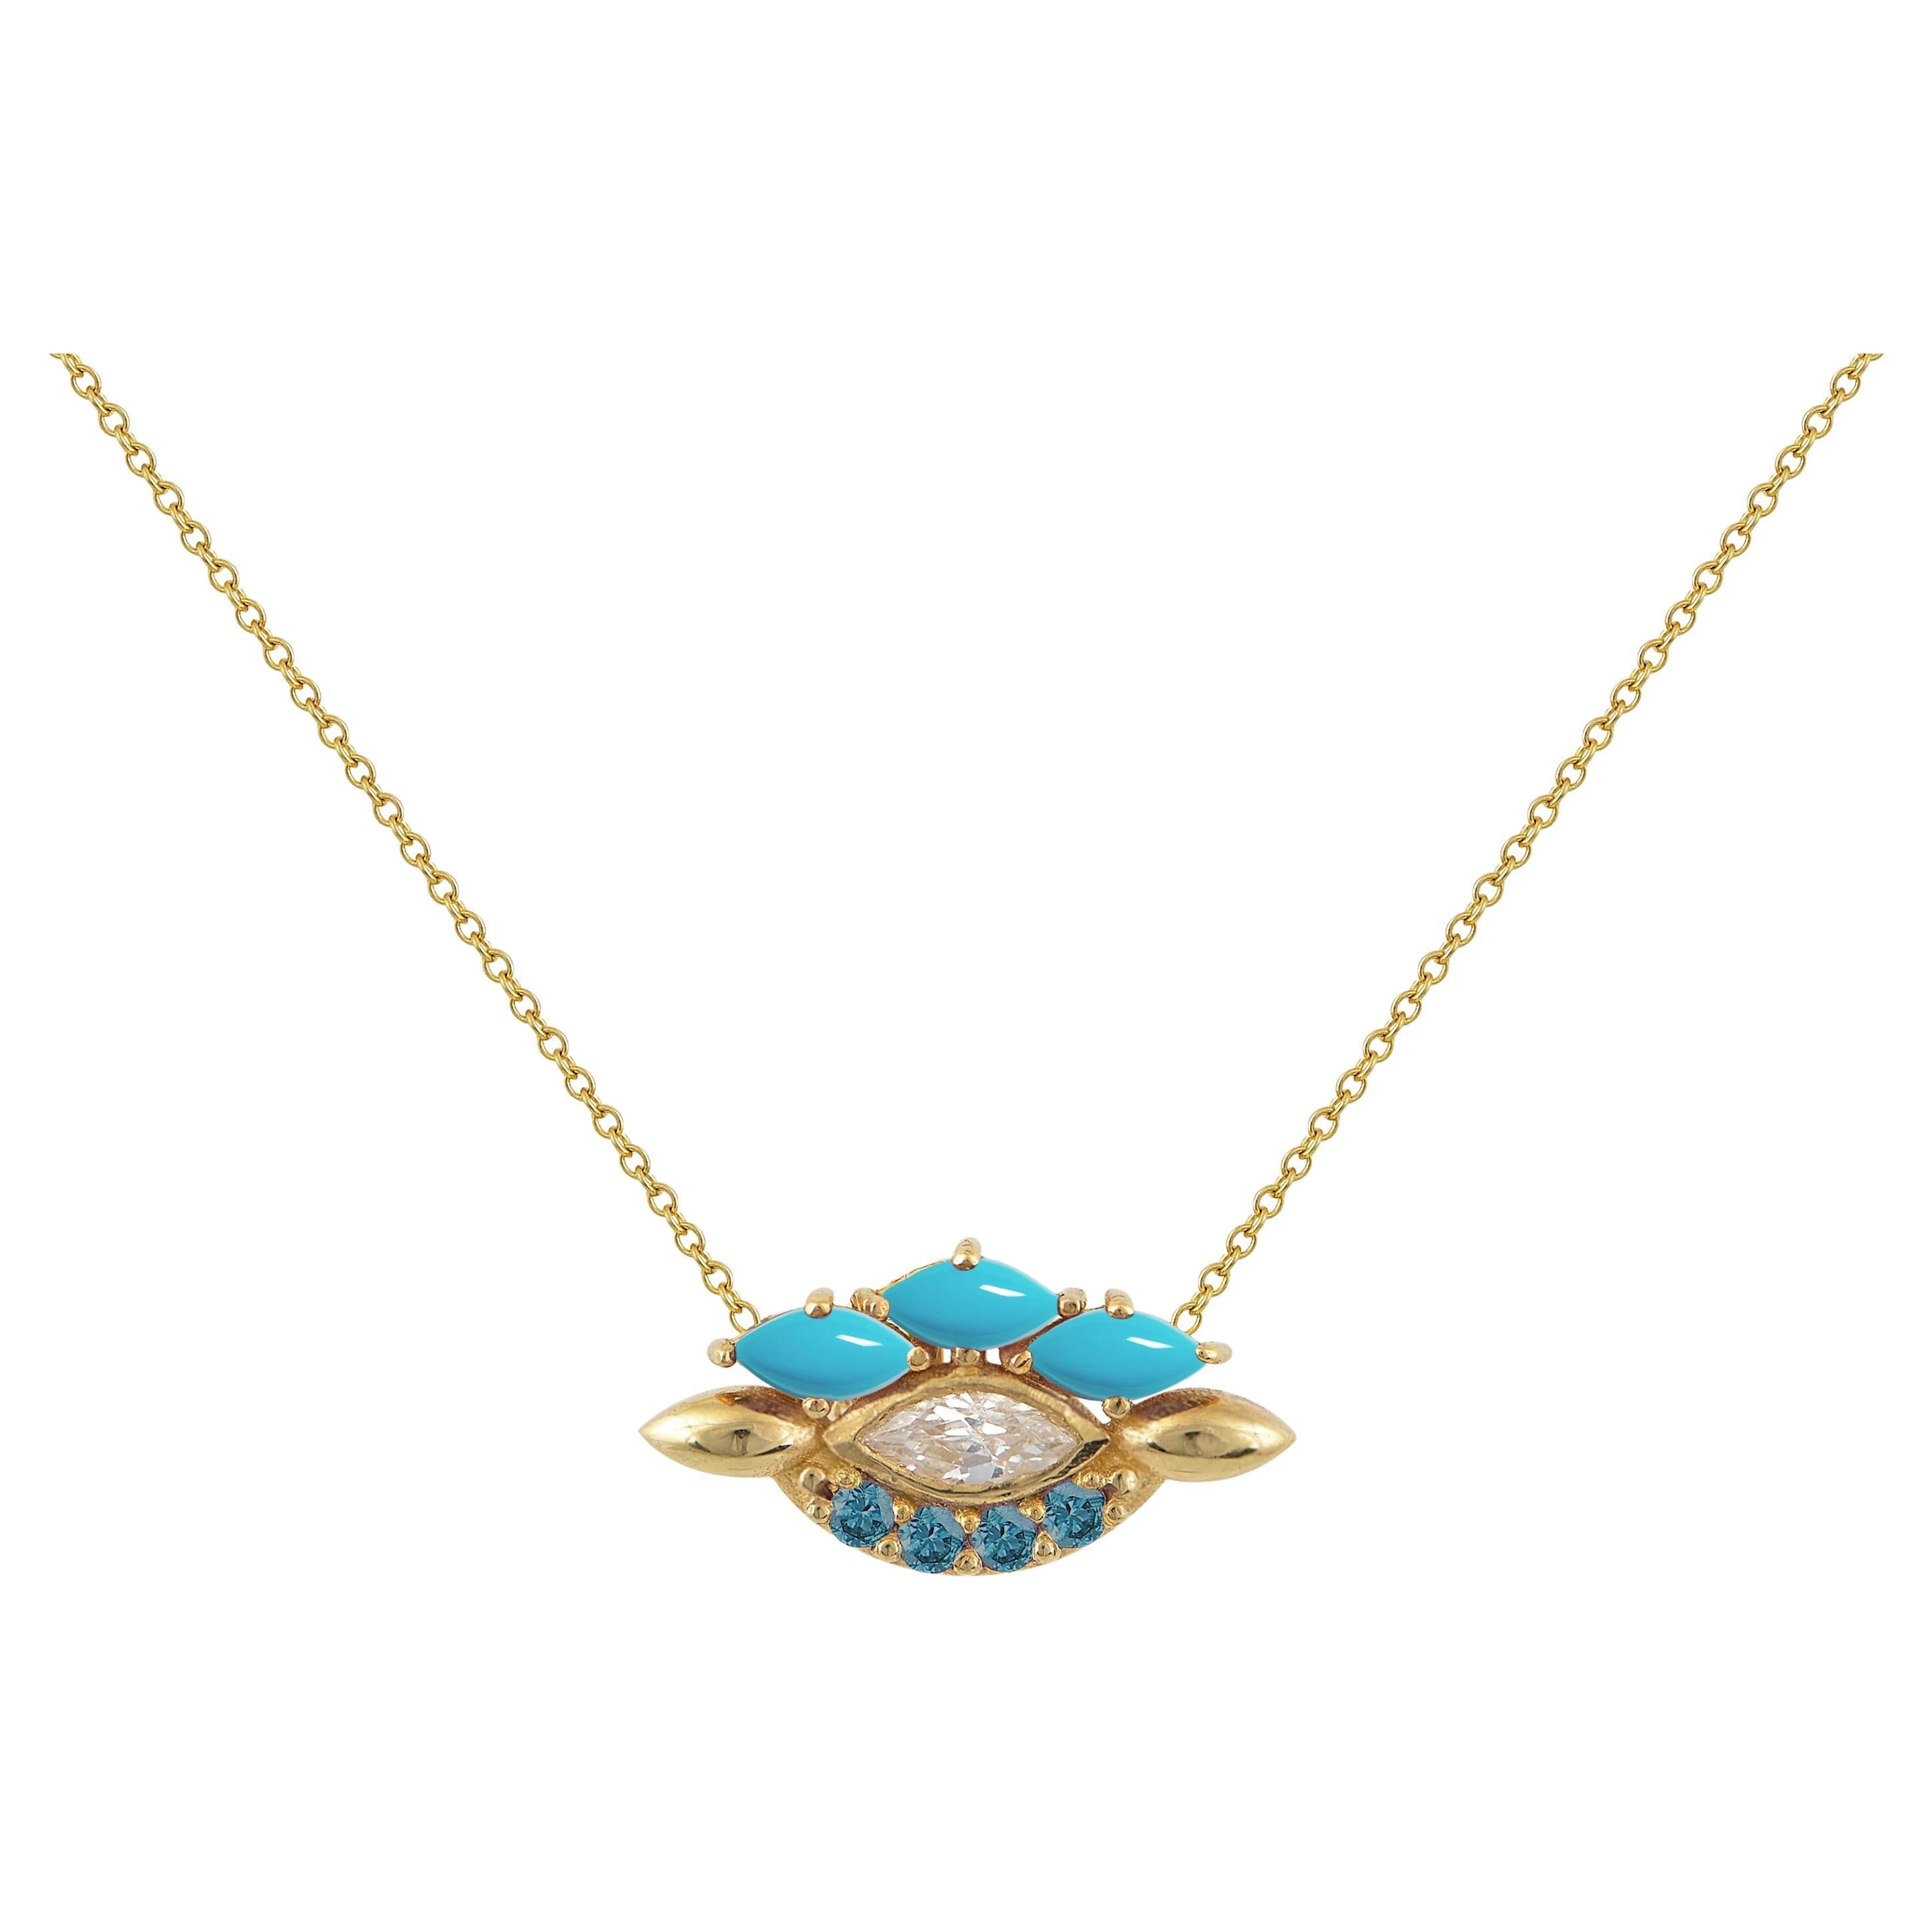 Eye Pendant in 18 Karat Yellow Gold with Colorless Diamond, Topaz And Turquoise